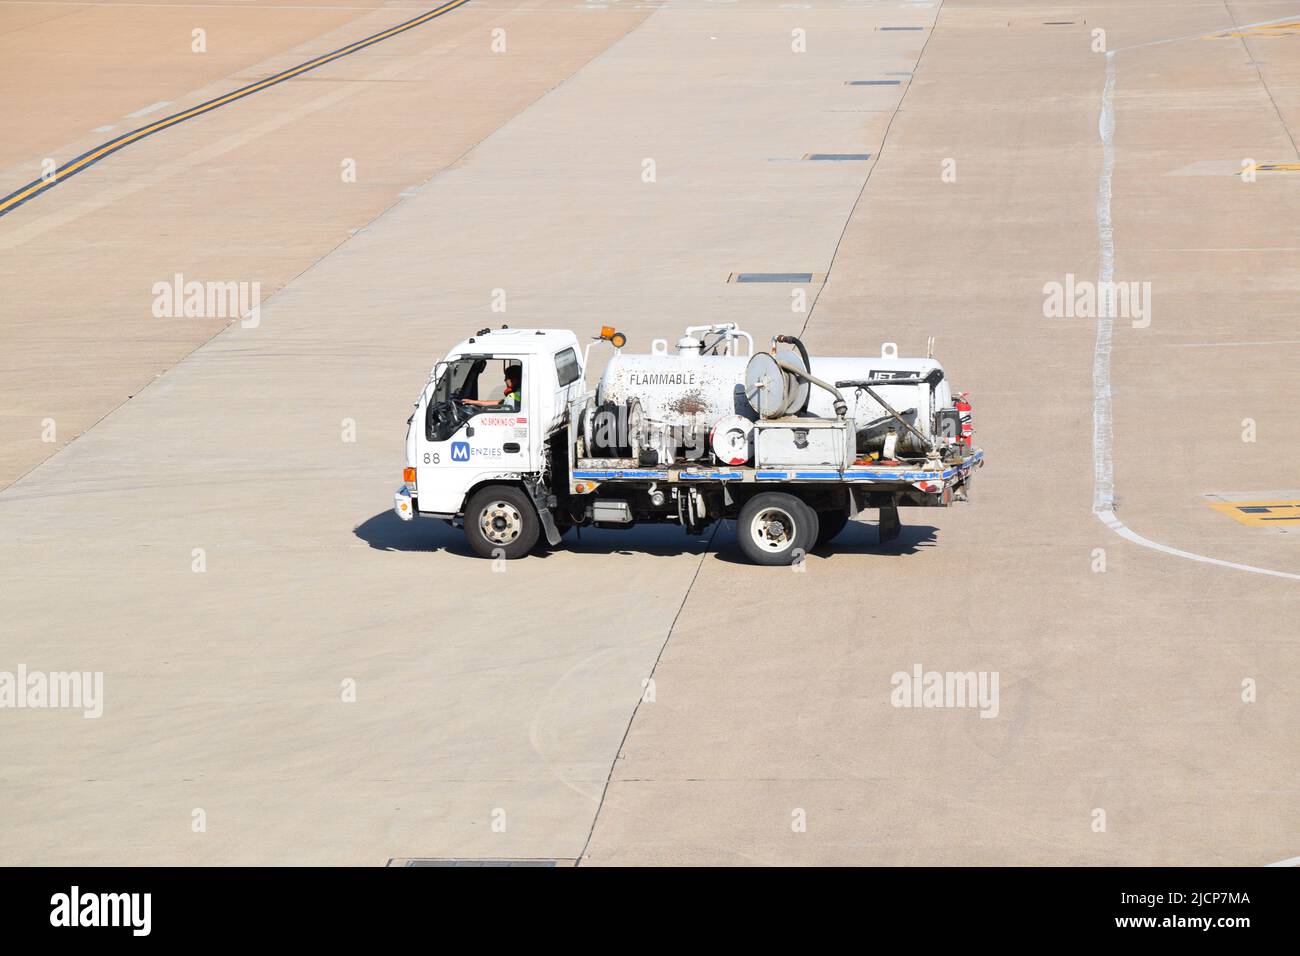 A Menzies Aviation truck after delivering jet fuel; driving away from Terminal E at Dallas Fort Worth International Airport Stock Photo